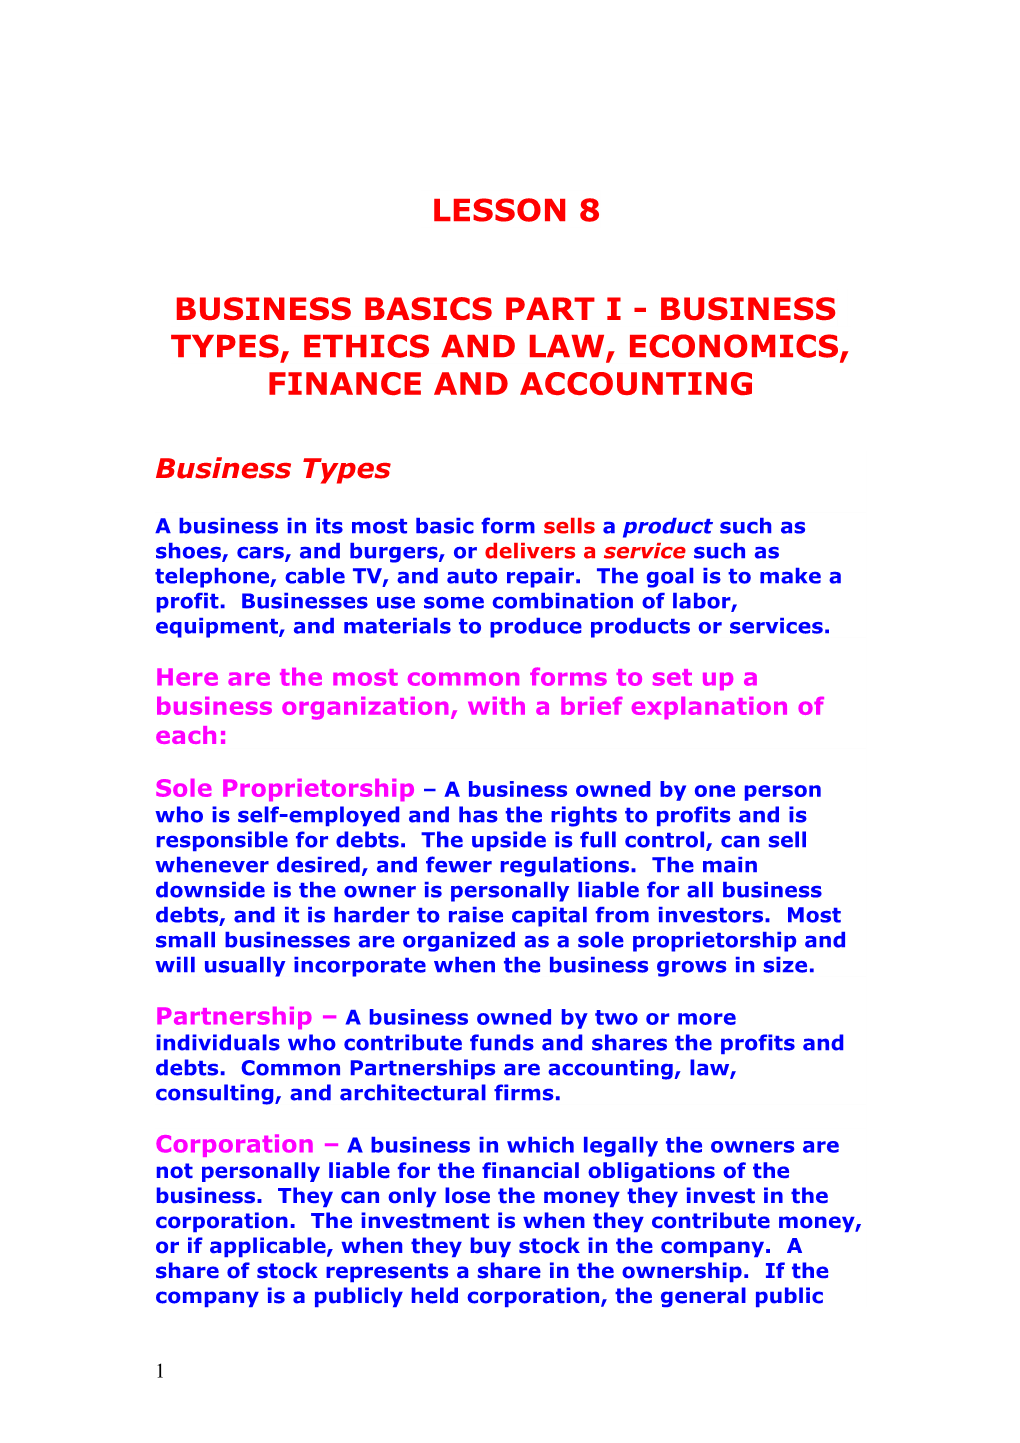 Business Basics Part I - Business Types, Ethics and Law, Economics, Finance and Accounting